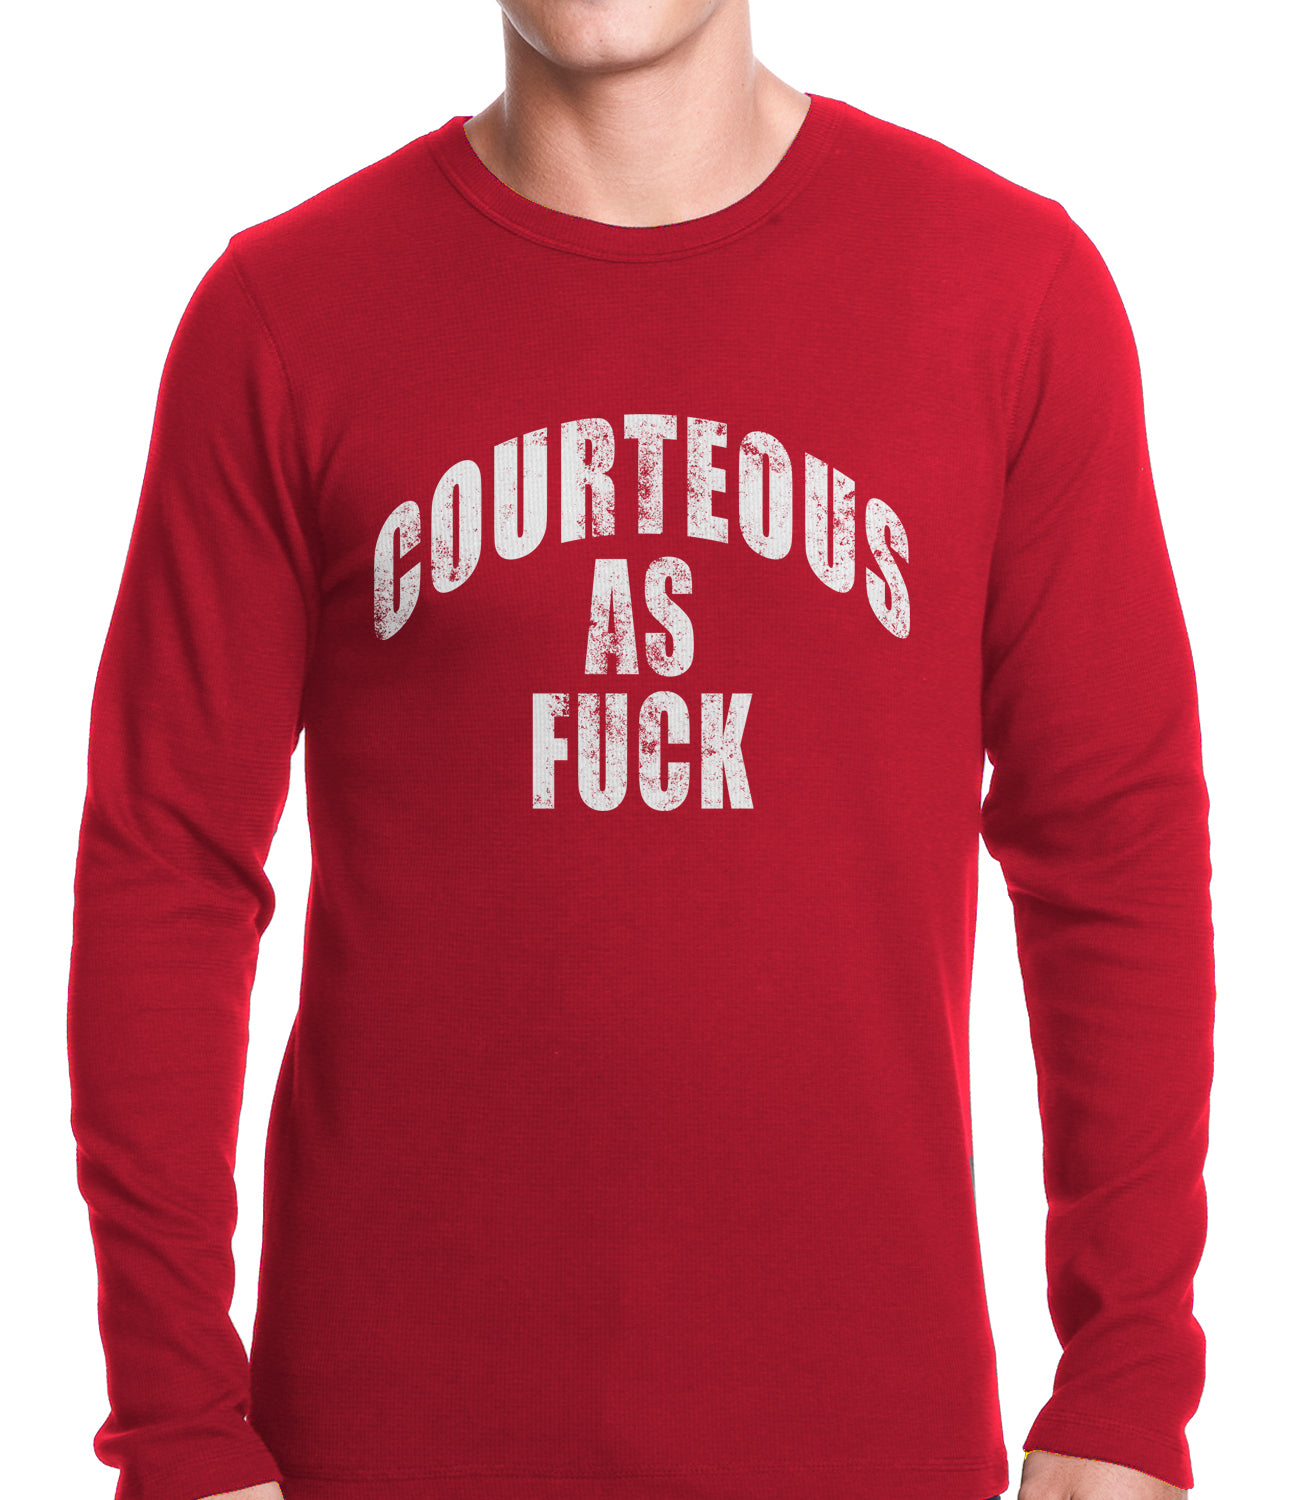 Courteous As Fuck Thermal Shirt